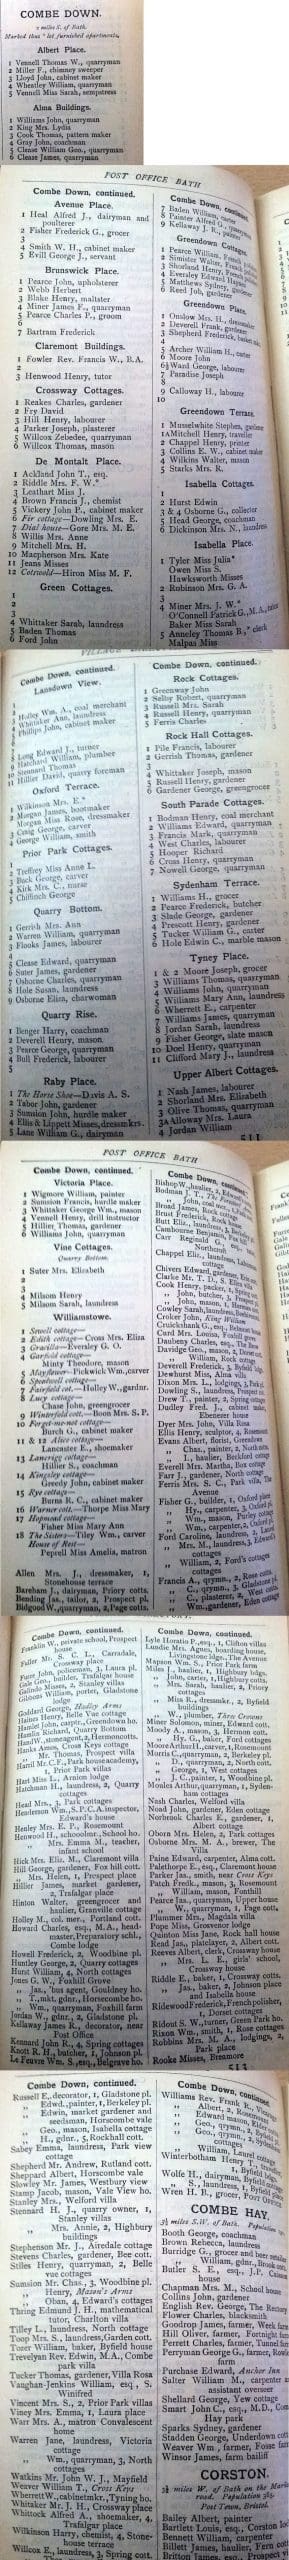 1892 Post Office Directory for Combe Down